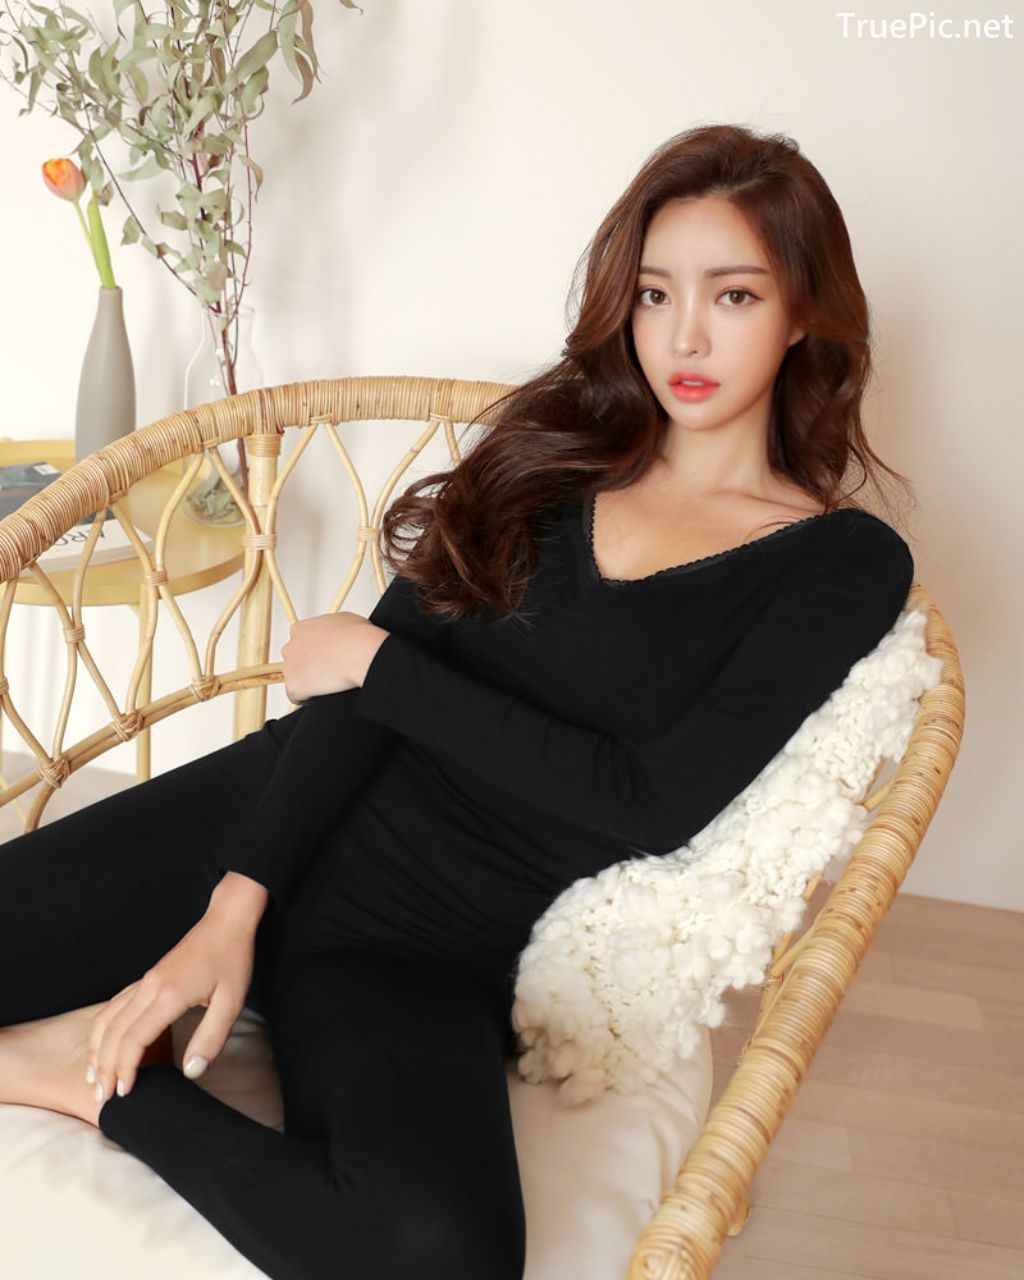 Image-Korean-Fashion-Model-Jin-Hee-Black-Tights-And-Winter-Sweater-Dress-TruePic.net- Picture-20